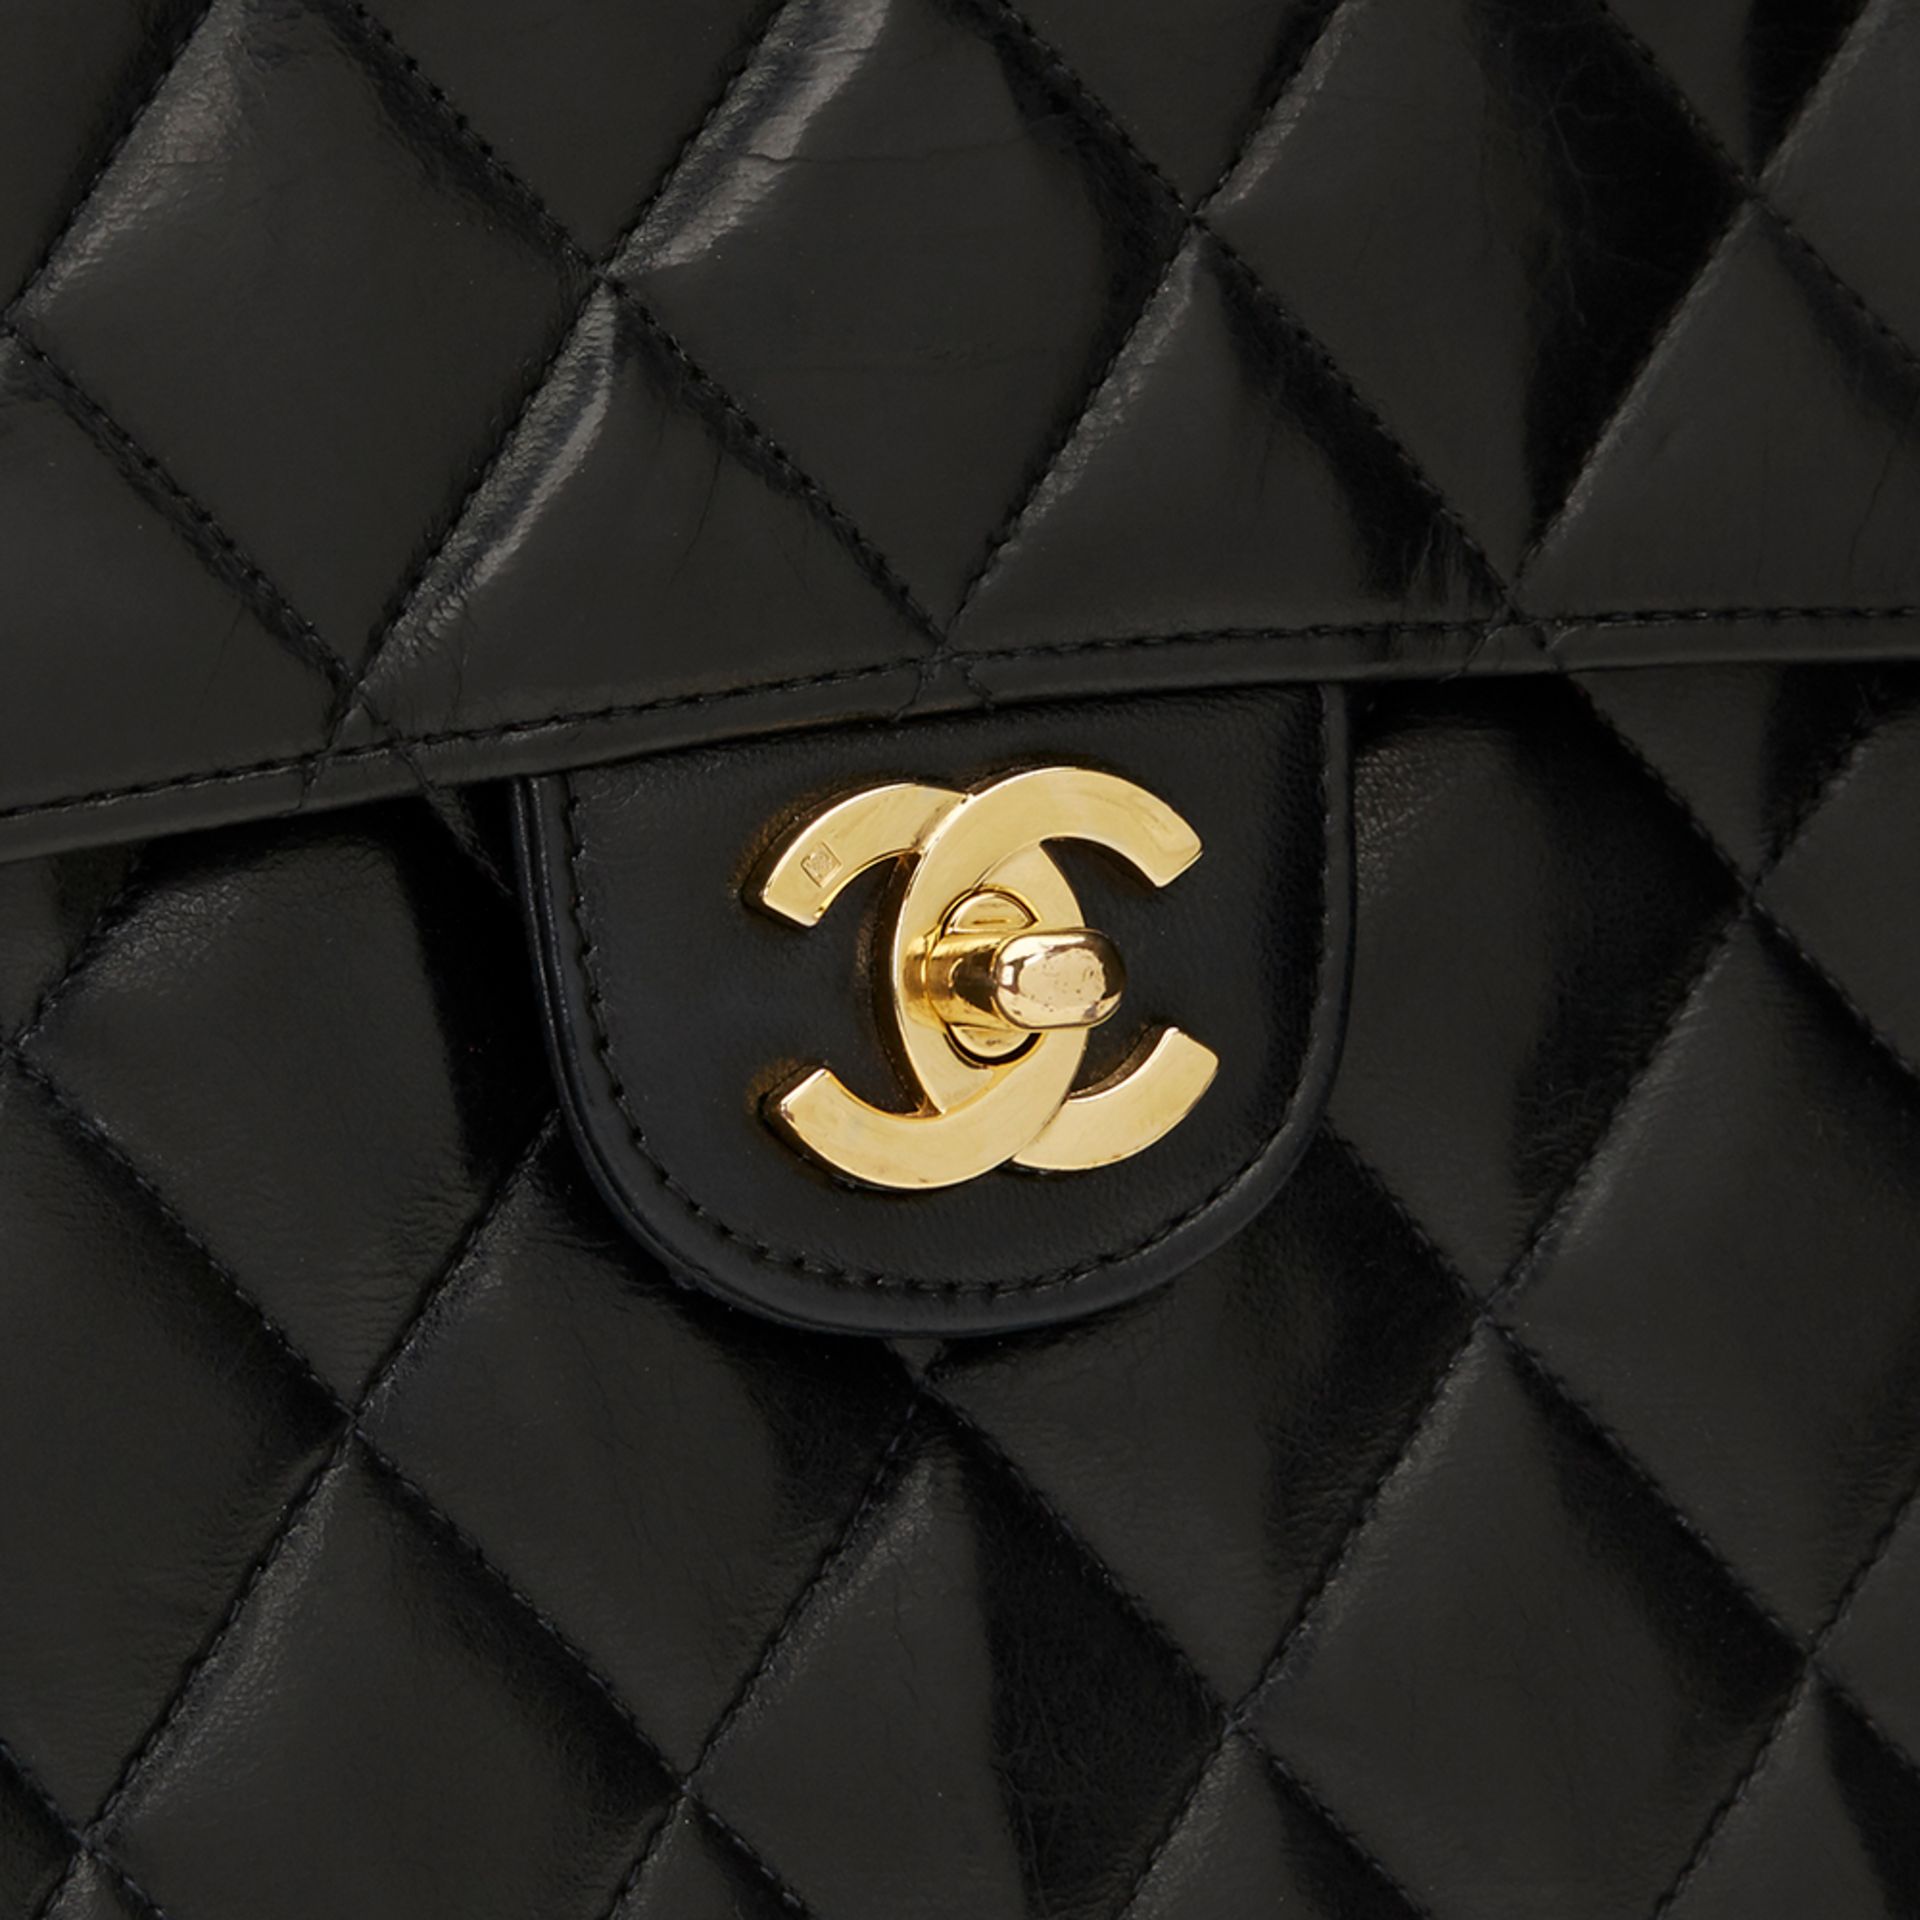 Chanel Black Quilted Lambskin Jumbo Classic Single Flap Bag - Image 11 of 11